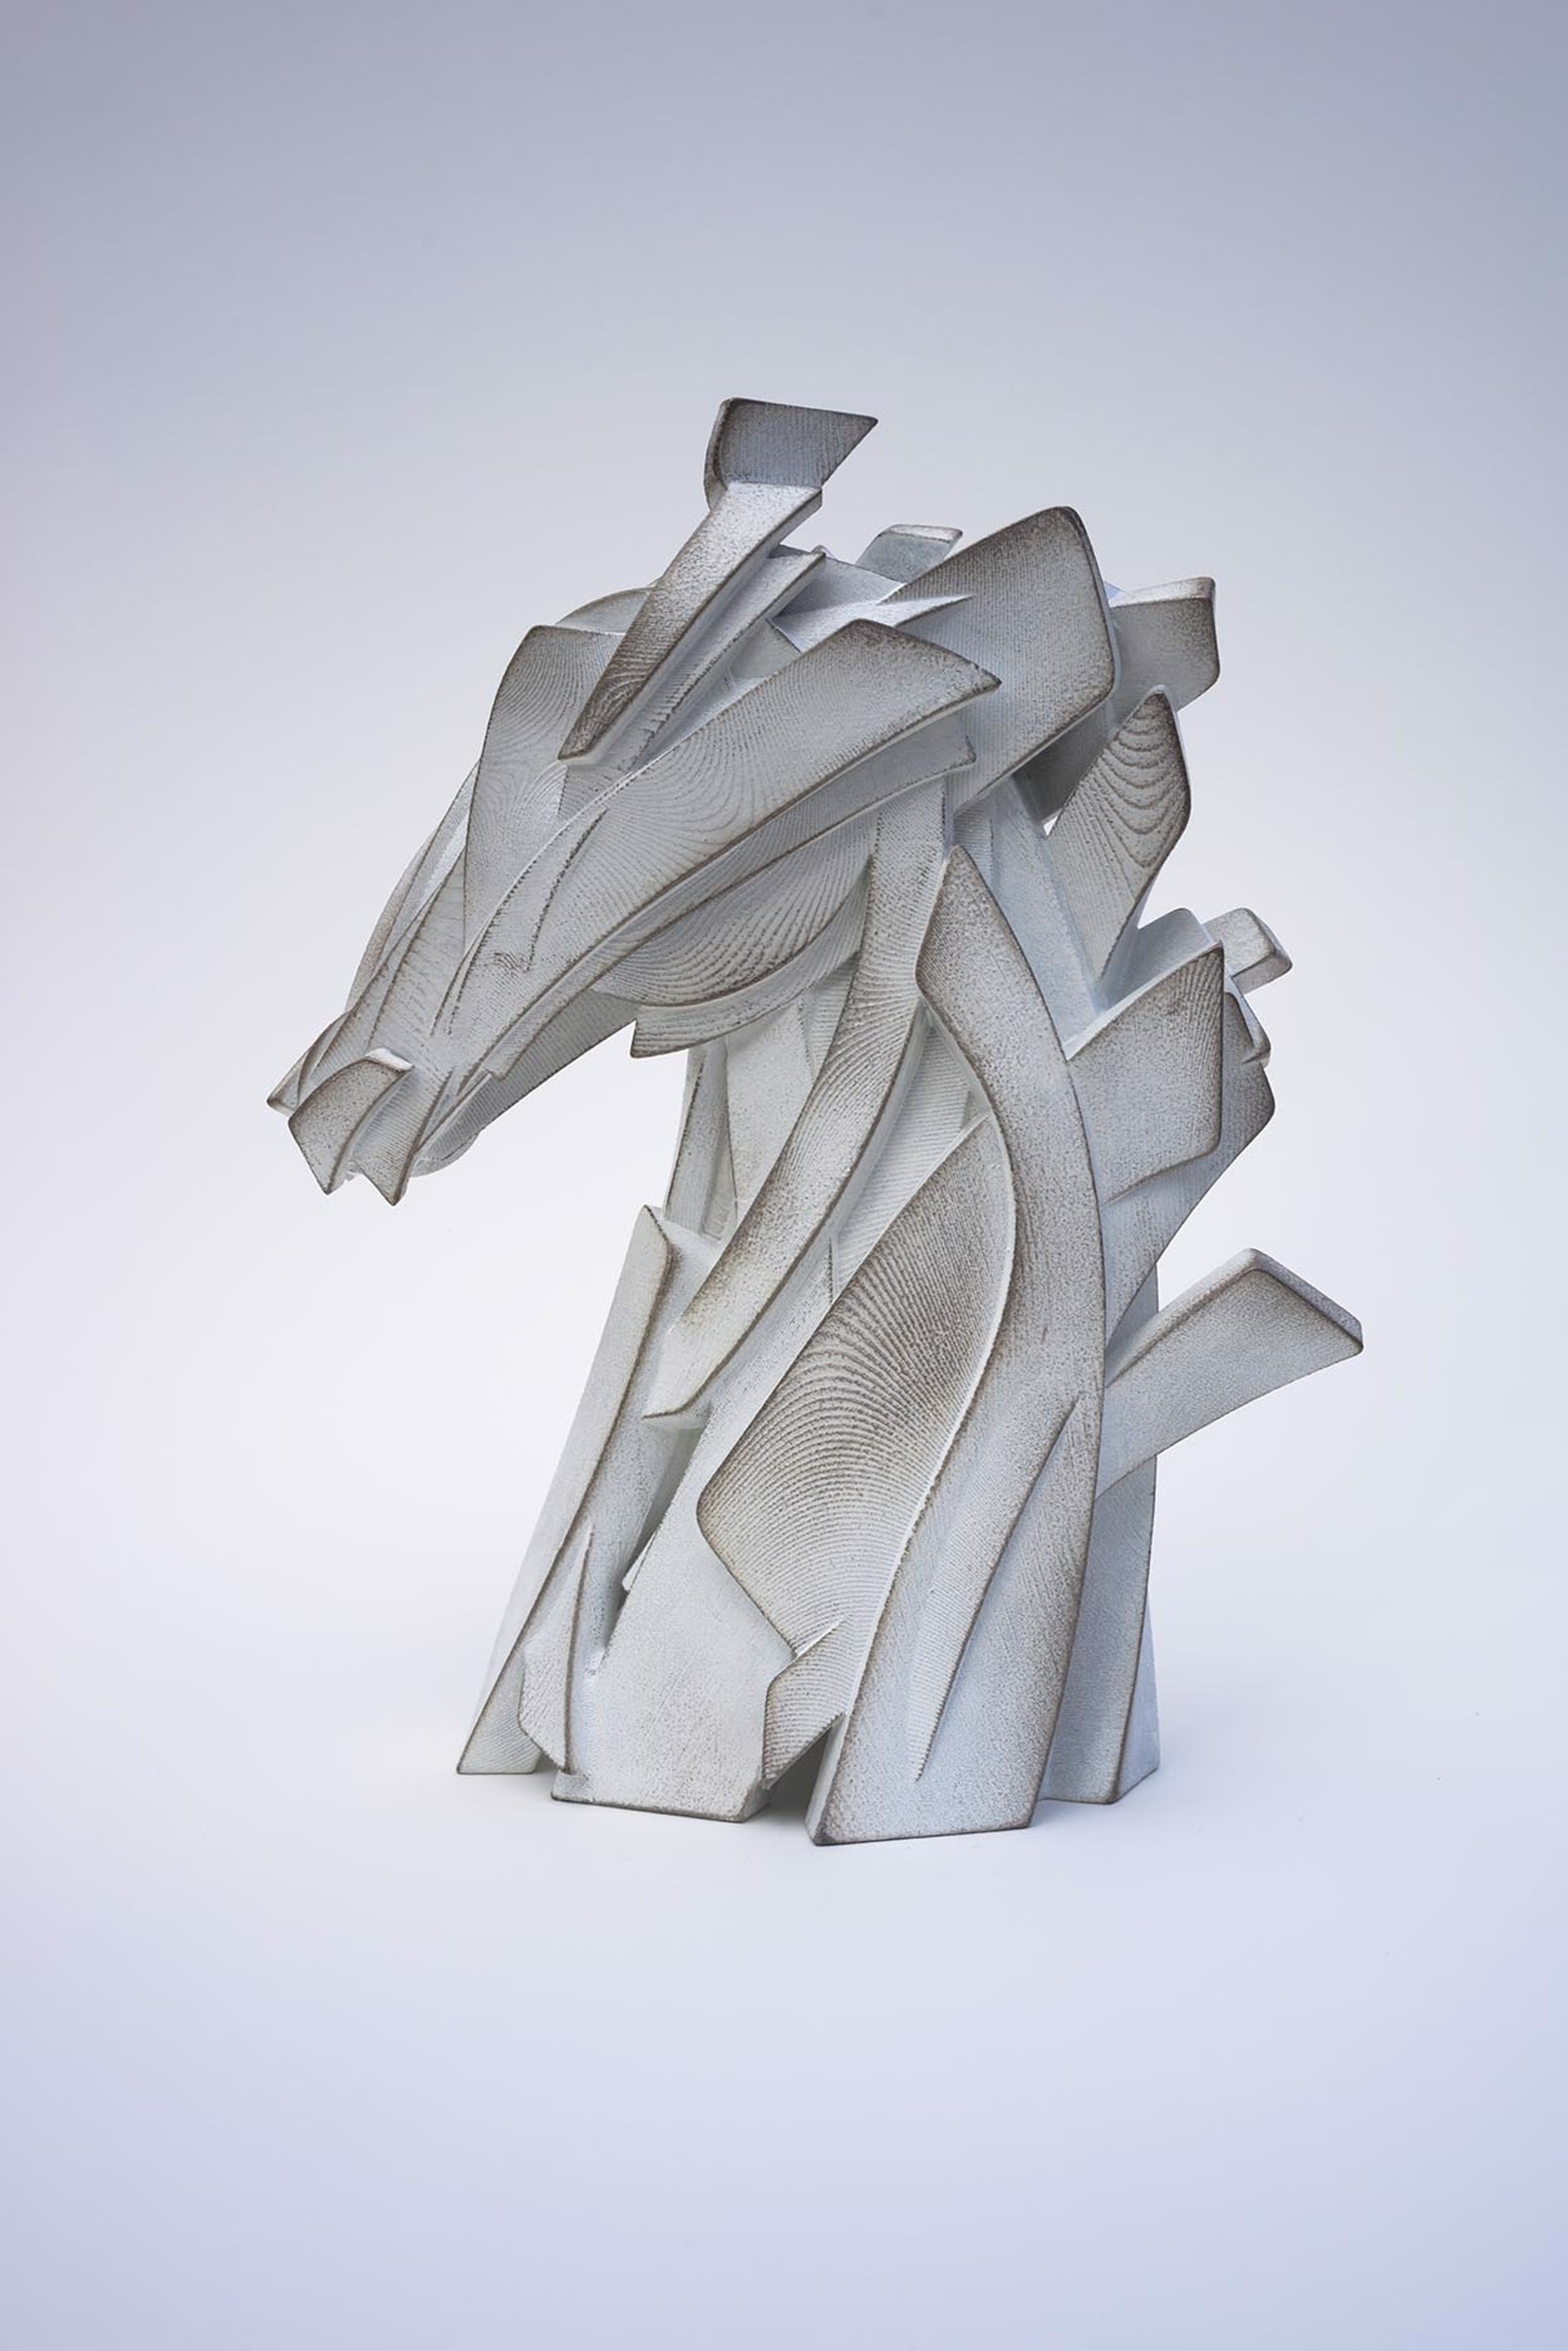 Abstract Knight by Gil Bruvel